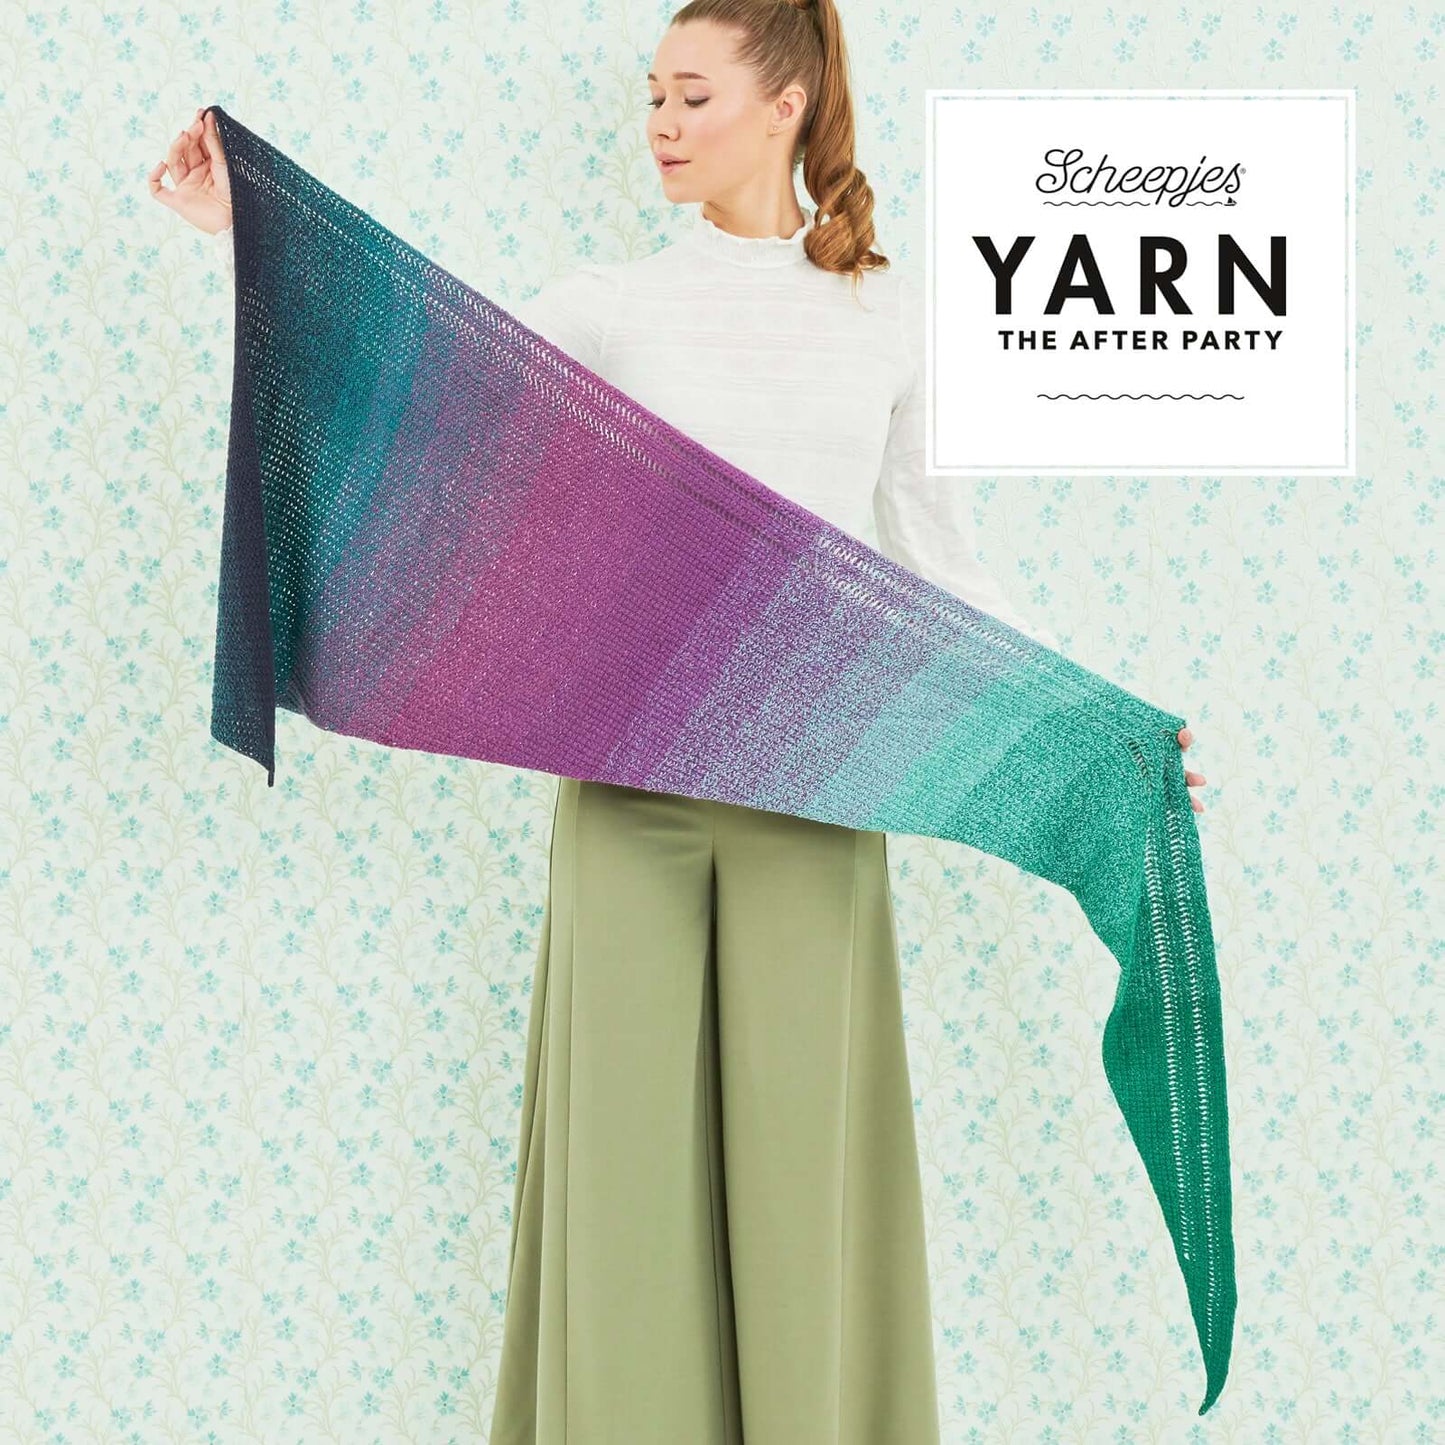 Scheepjes Yarn The After Party no. 32 - Exclamation Shawl (booklet) - (Tunisian Crochet)